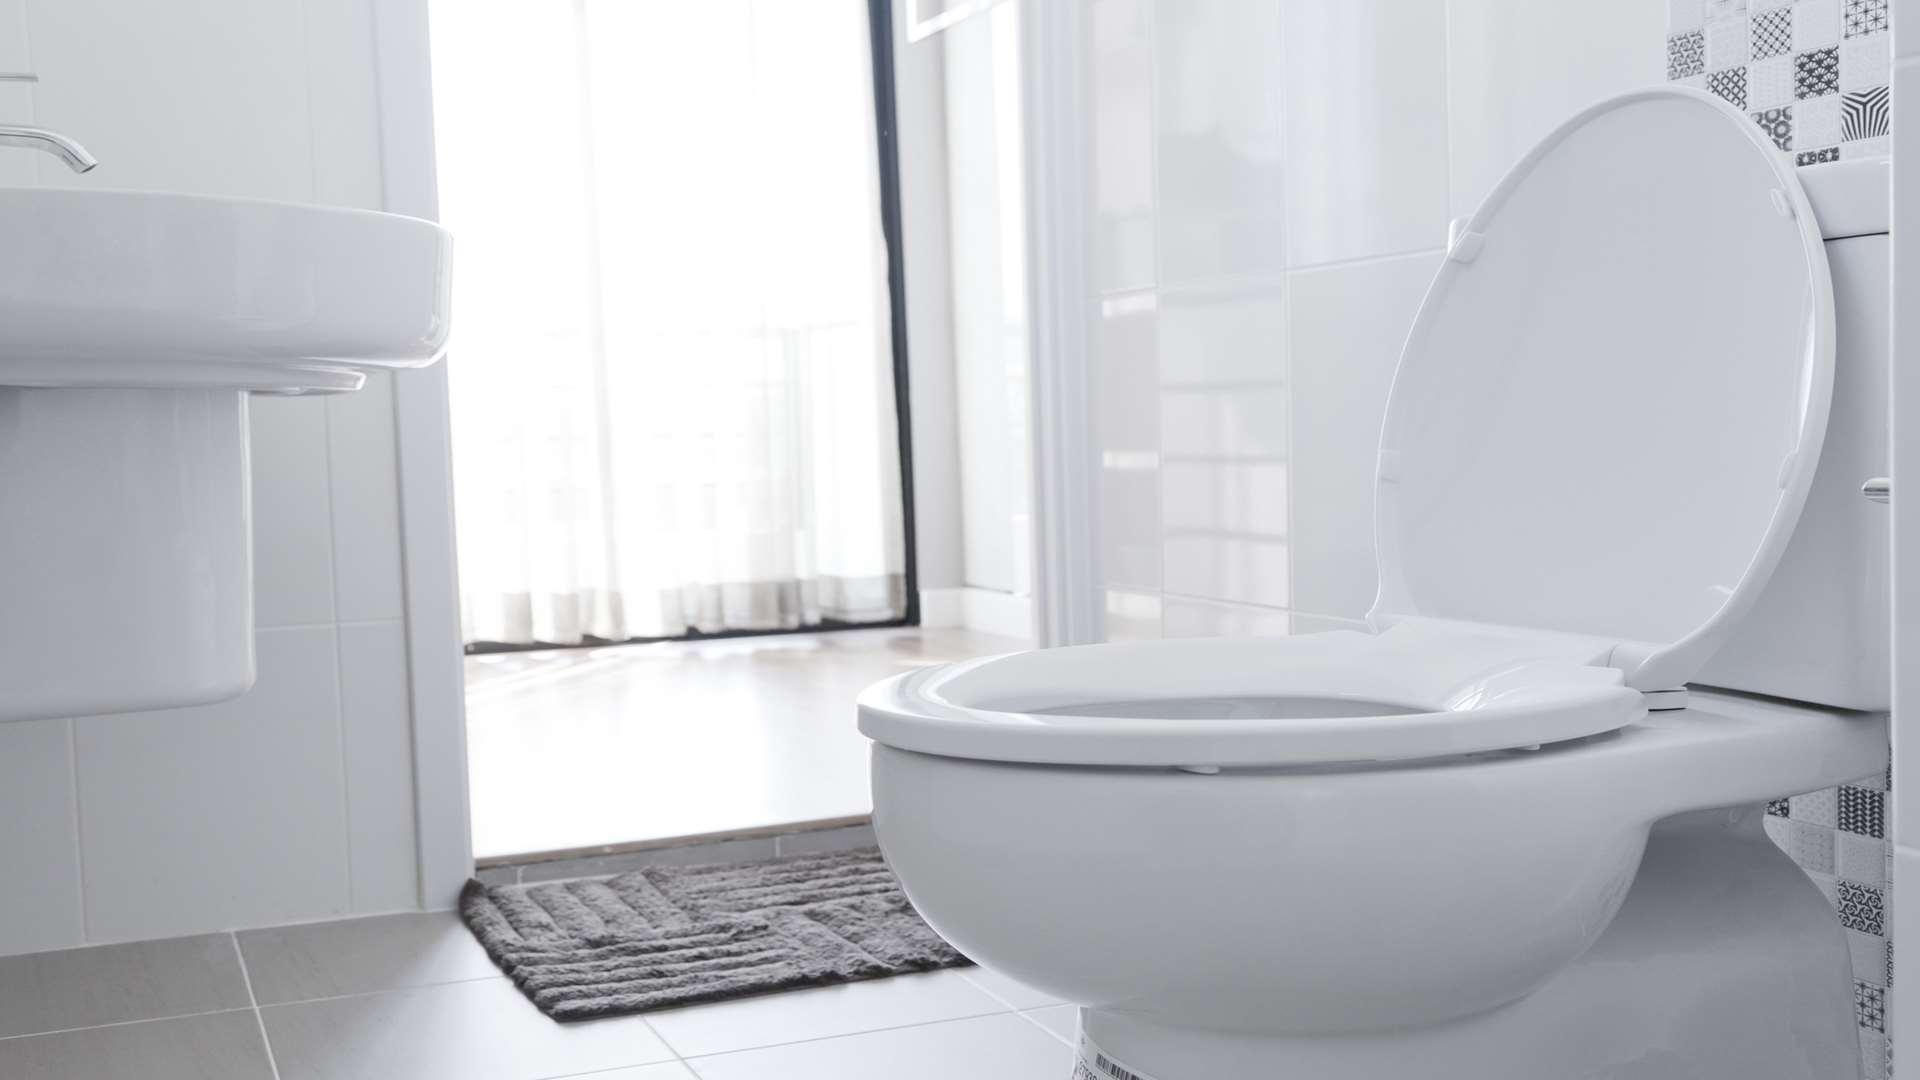 How hard is it to close the toilet seat?